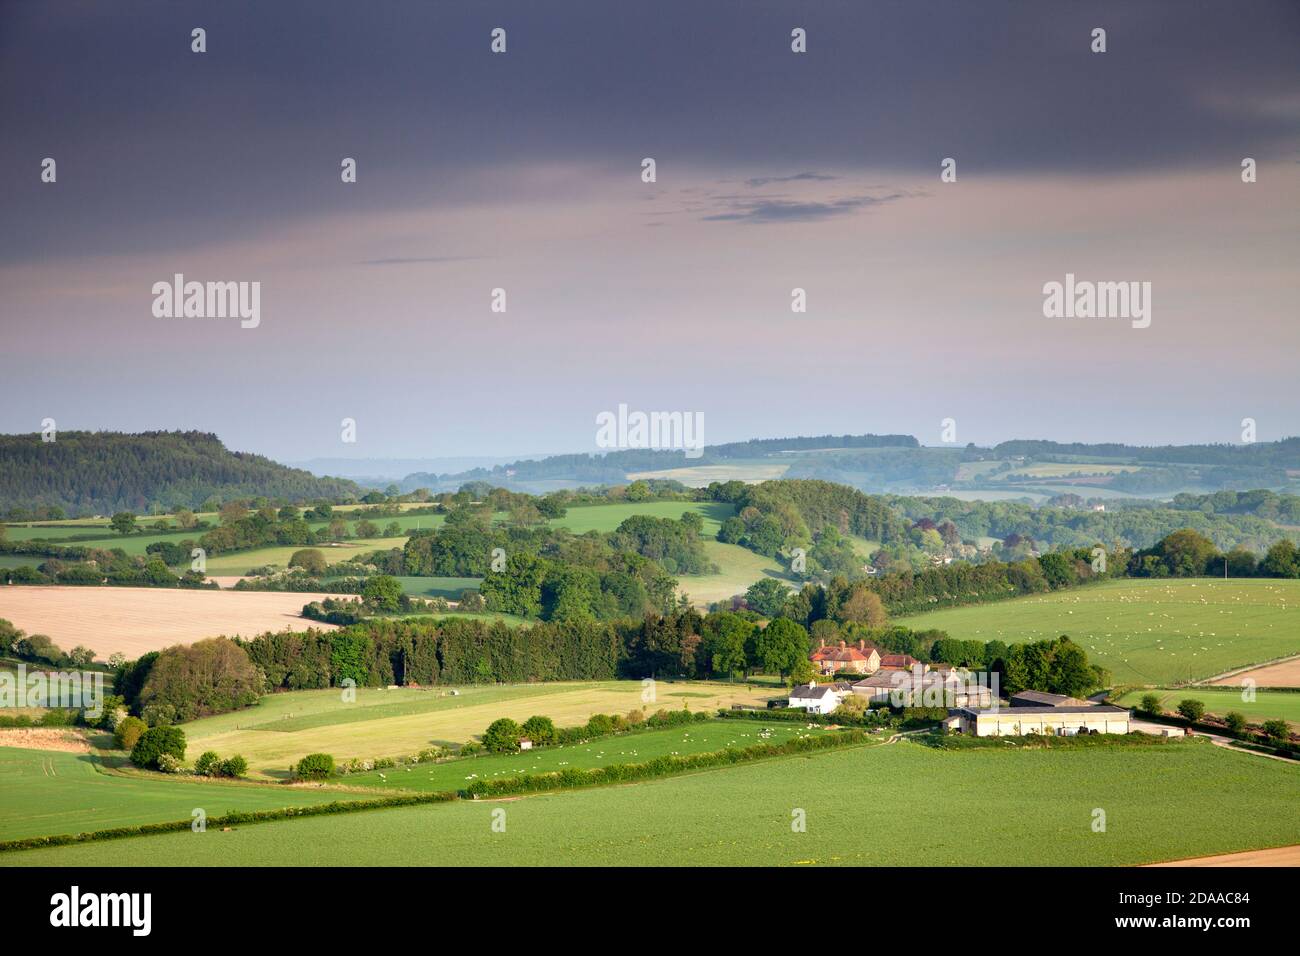 Farmland near the village of Swallowcliffe in Wiltshire, viewed from Swallowcliffe Down. Stock Photo